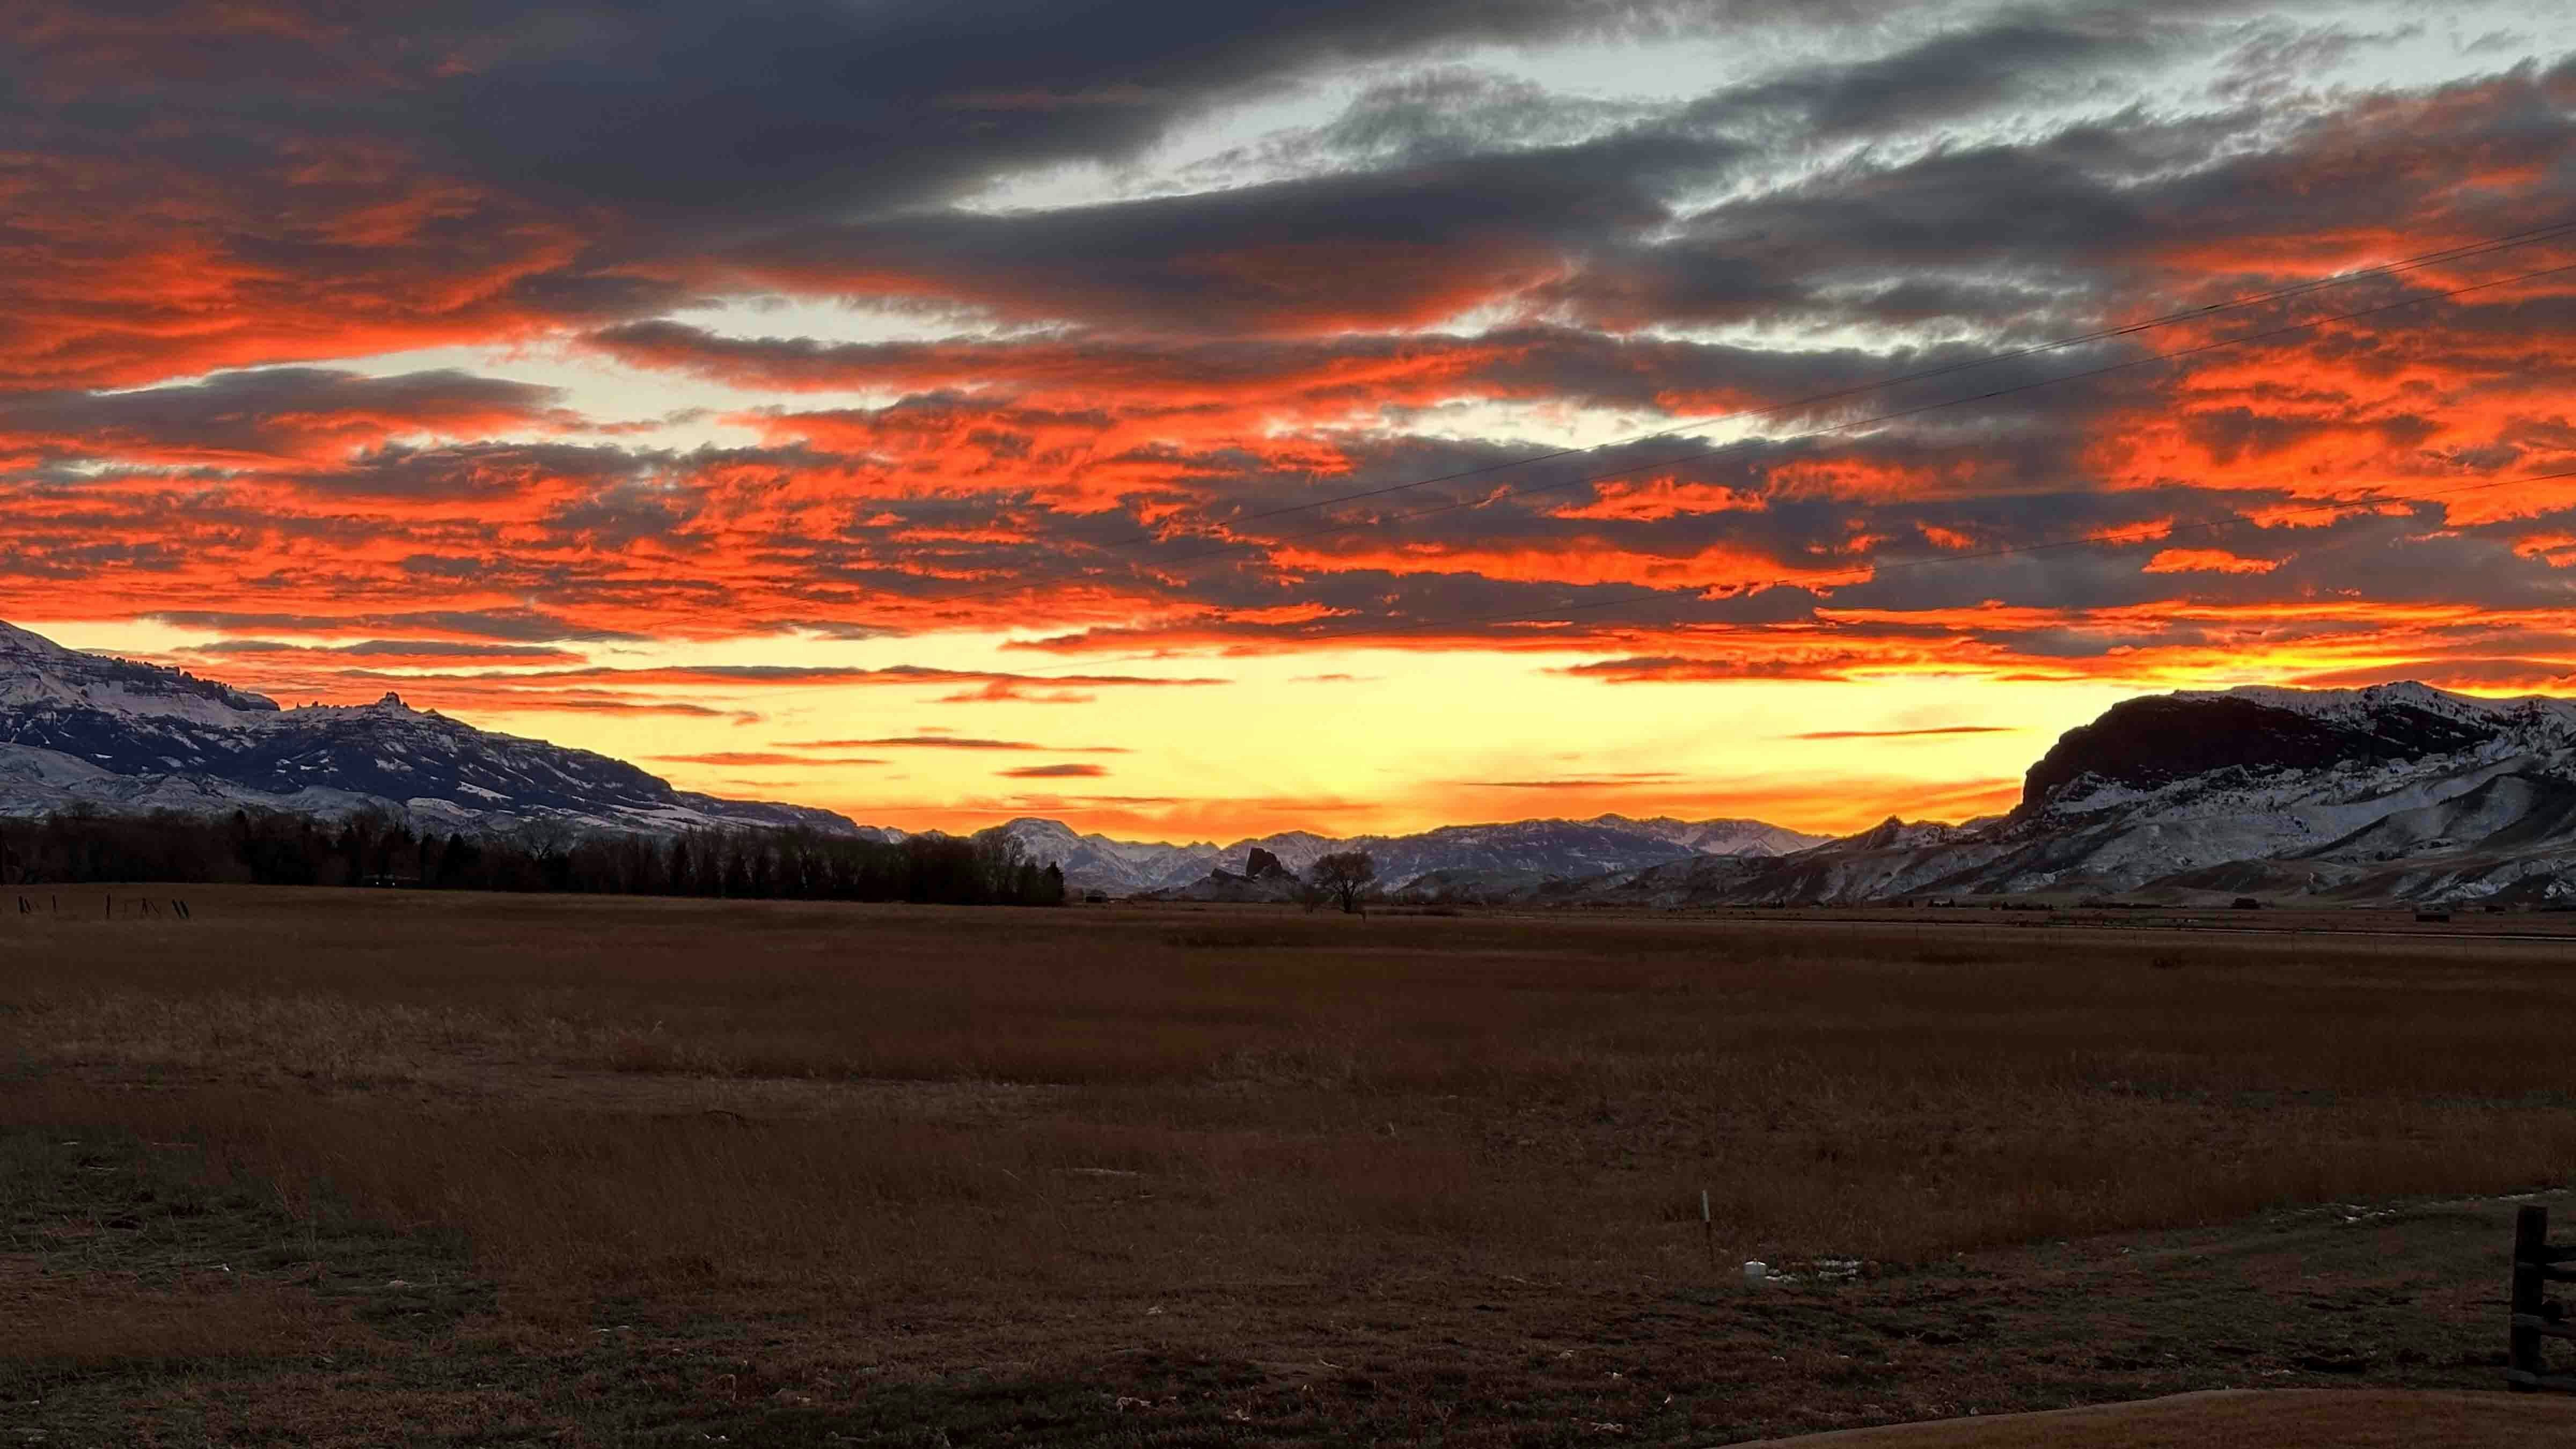 Last sunset of the year from the South Fork of the Shoshone River valley.